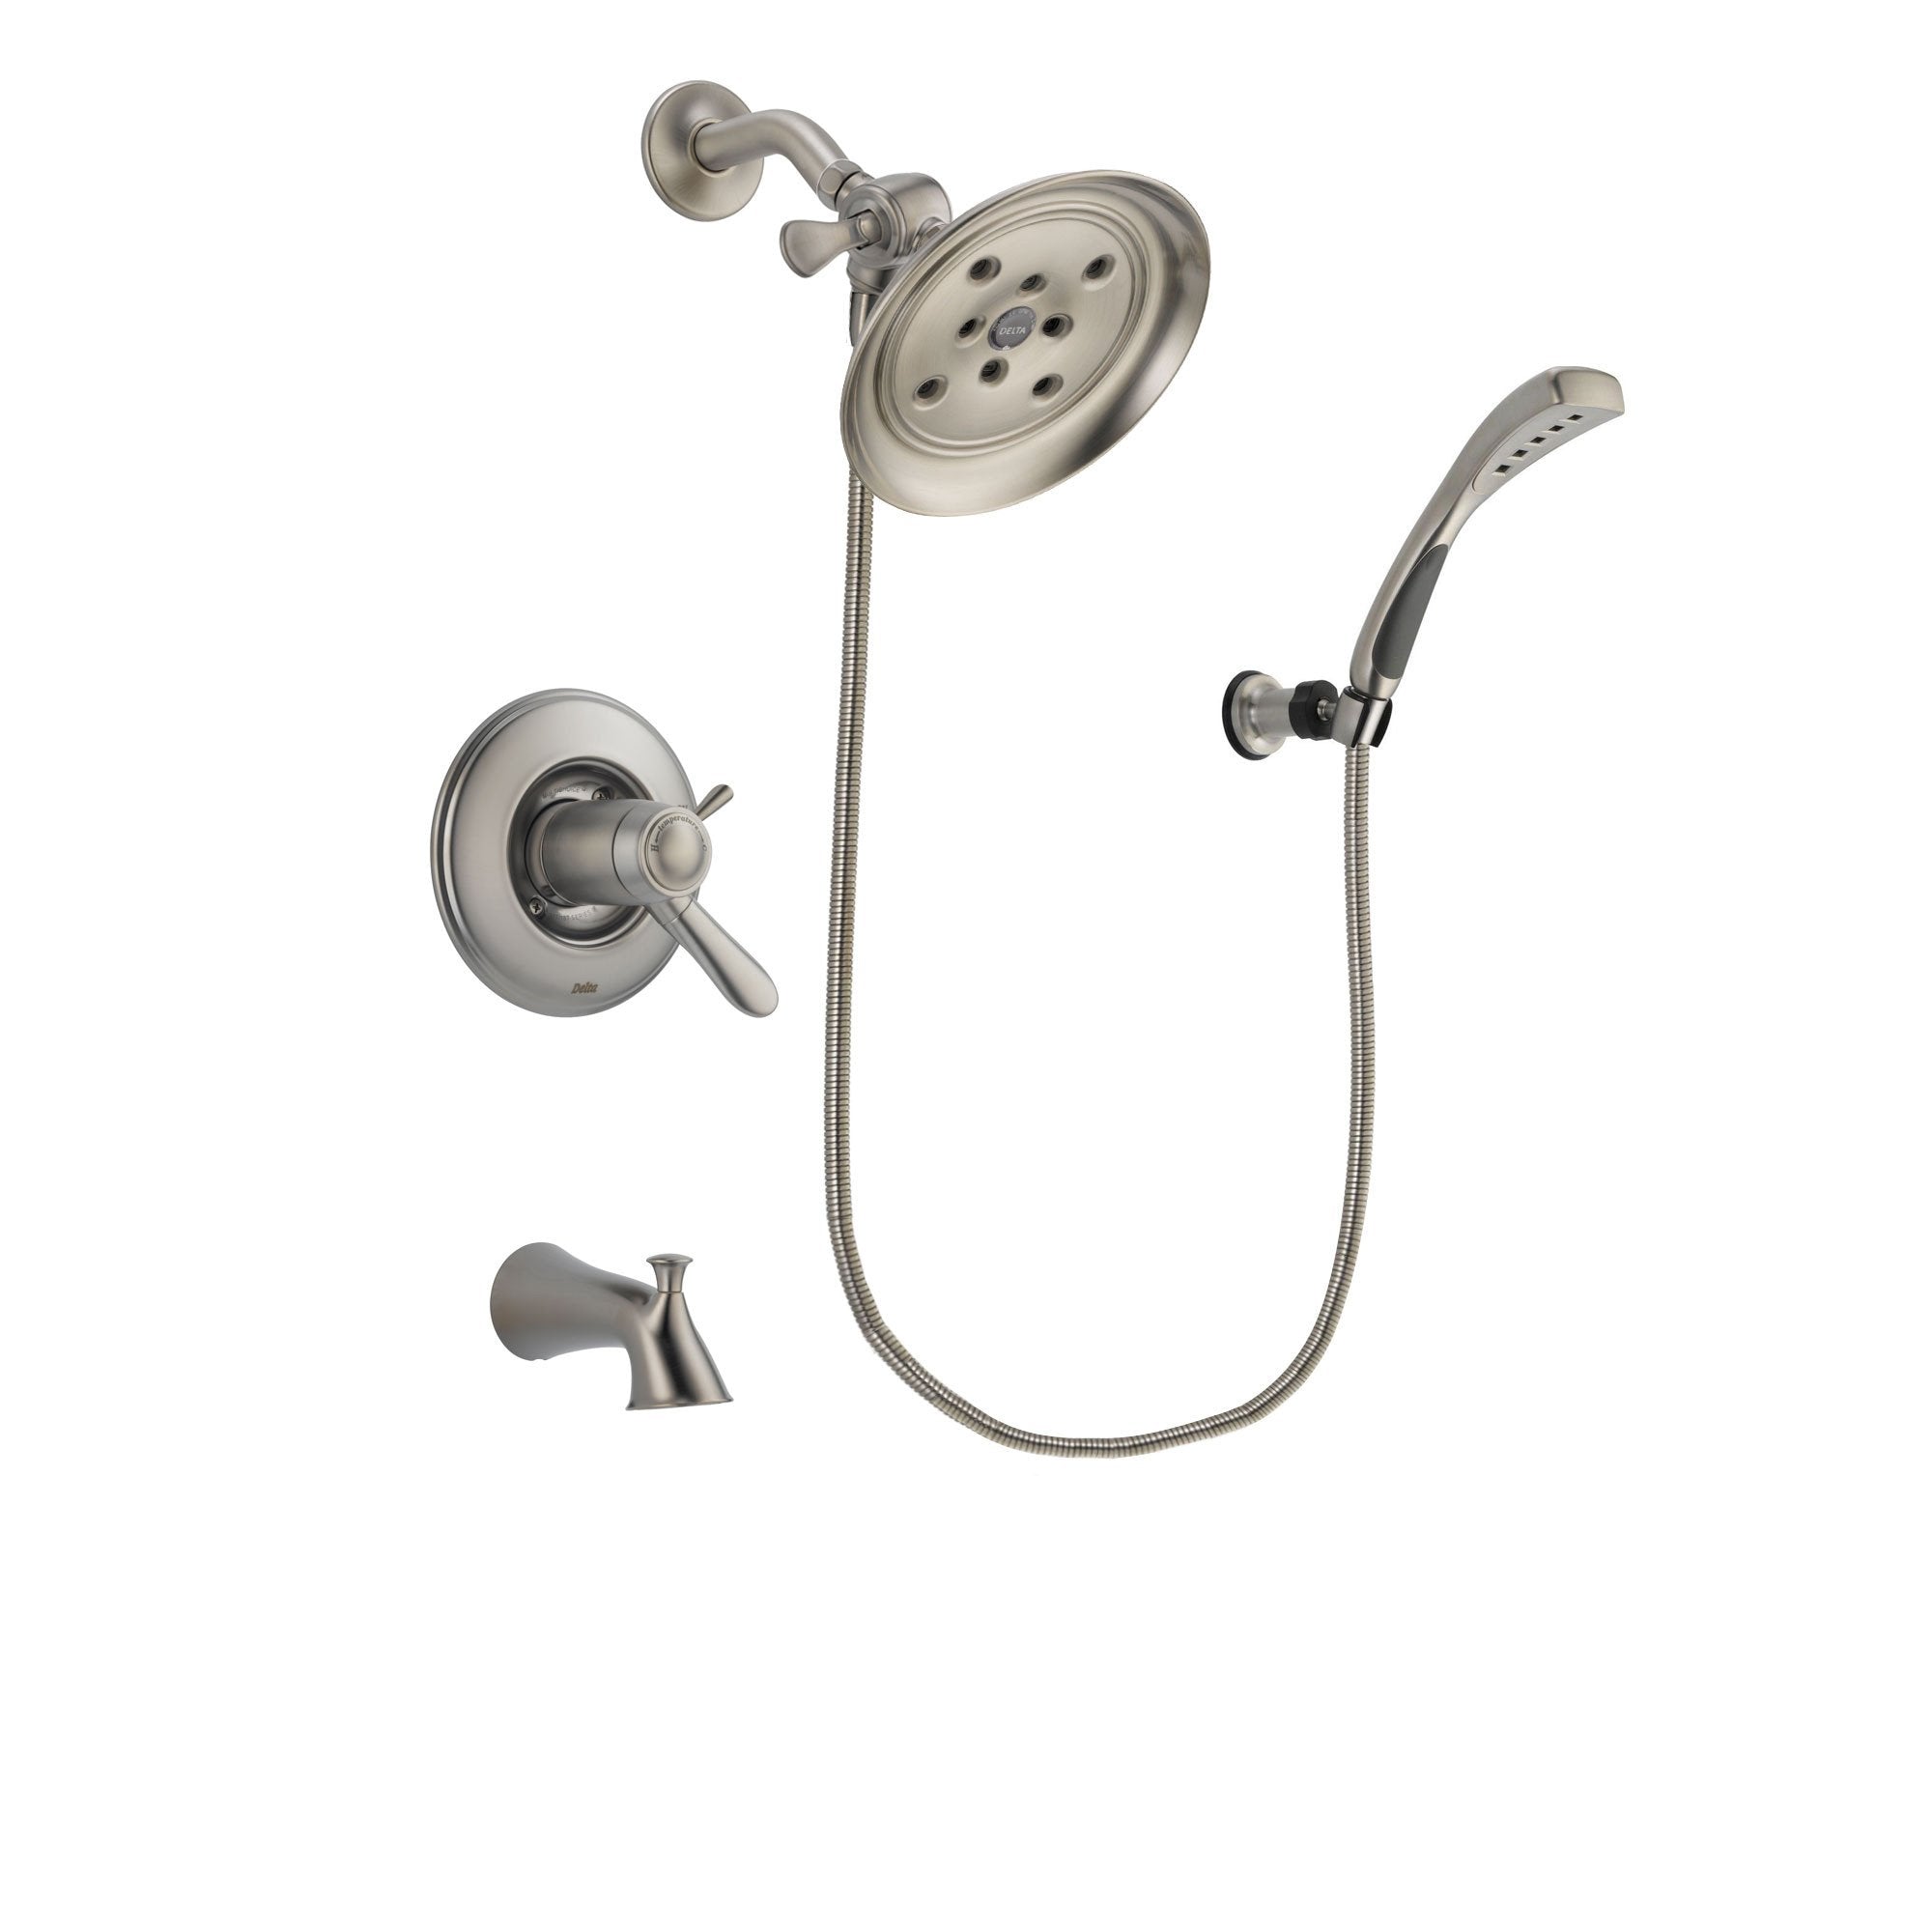 Delta Lahara Stainless Steel Finish Thermostatic Tub and Shower Faucet System Package with Large Rain Showerhead and Wall Mounted Handshower Includes Rough-in Valve and Tub Spout DSP1853V